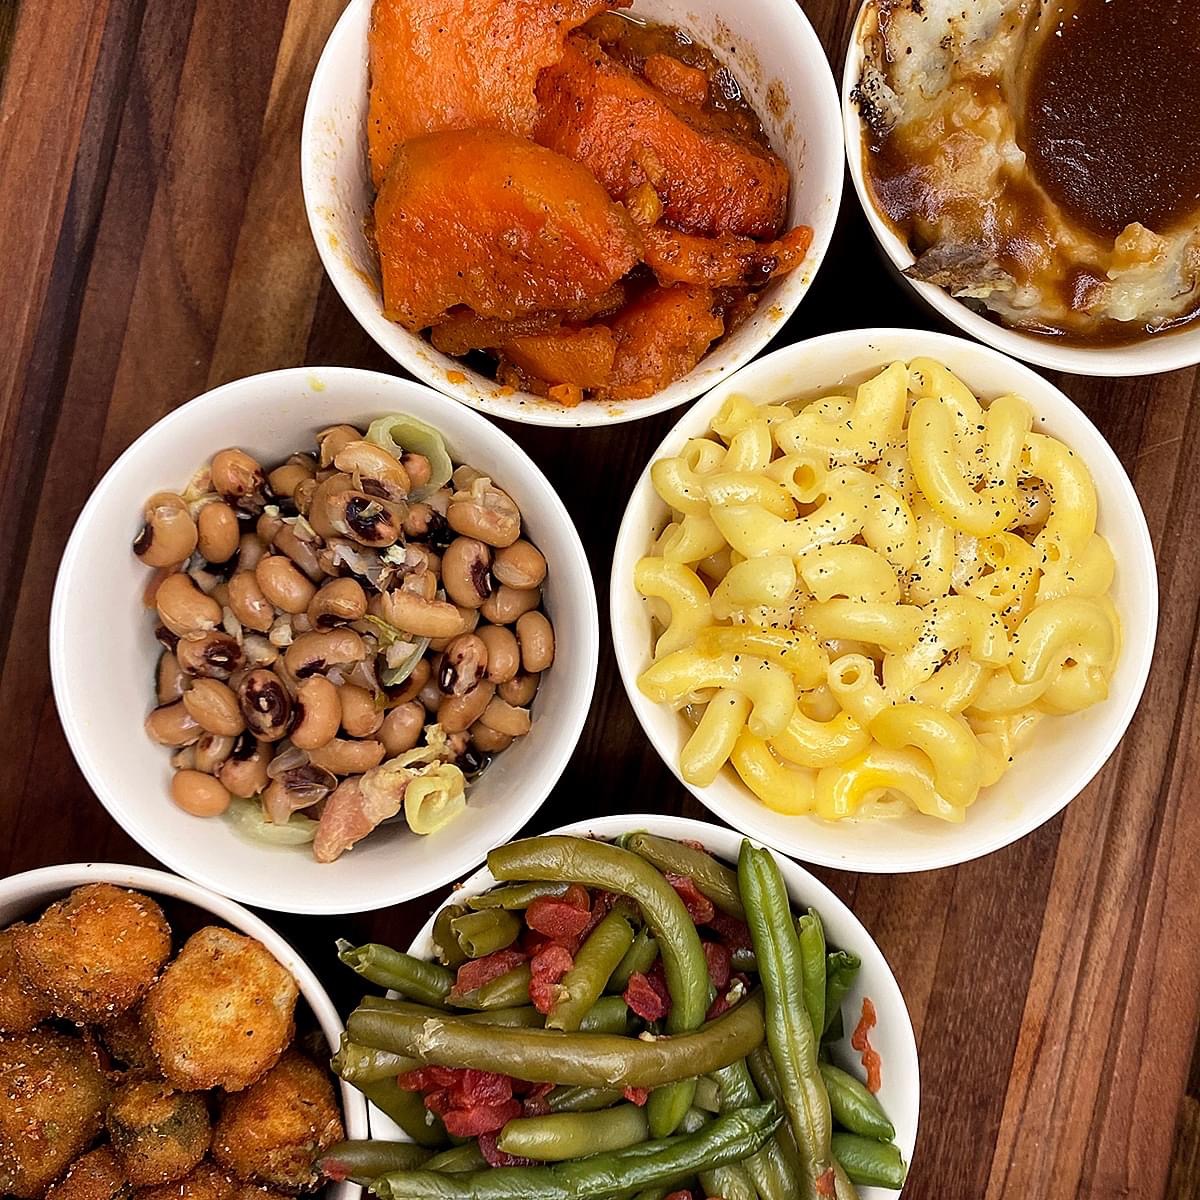 Variety is the spice of life. ✨️ Spice up your meal with Mr. C’s Southern sides. 😋

👉🏼 Order Online at mrcsfcw.com.

#mrcsfriedchickenandwaffles #southerncooking #comfortfood #safoodie #safood #satxfood #sanantoniofood #safoodpics #eatlocalsa #sanantonioeats